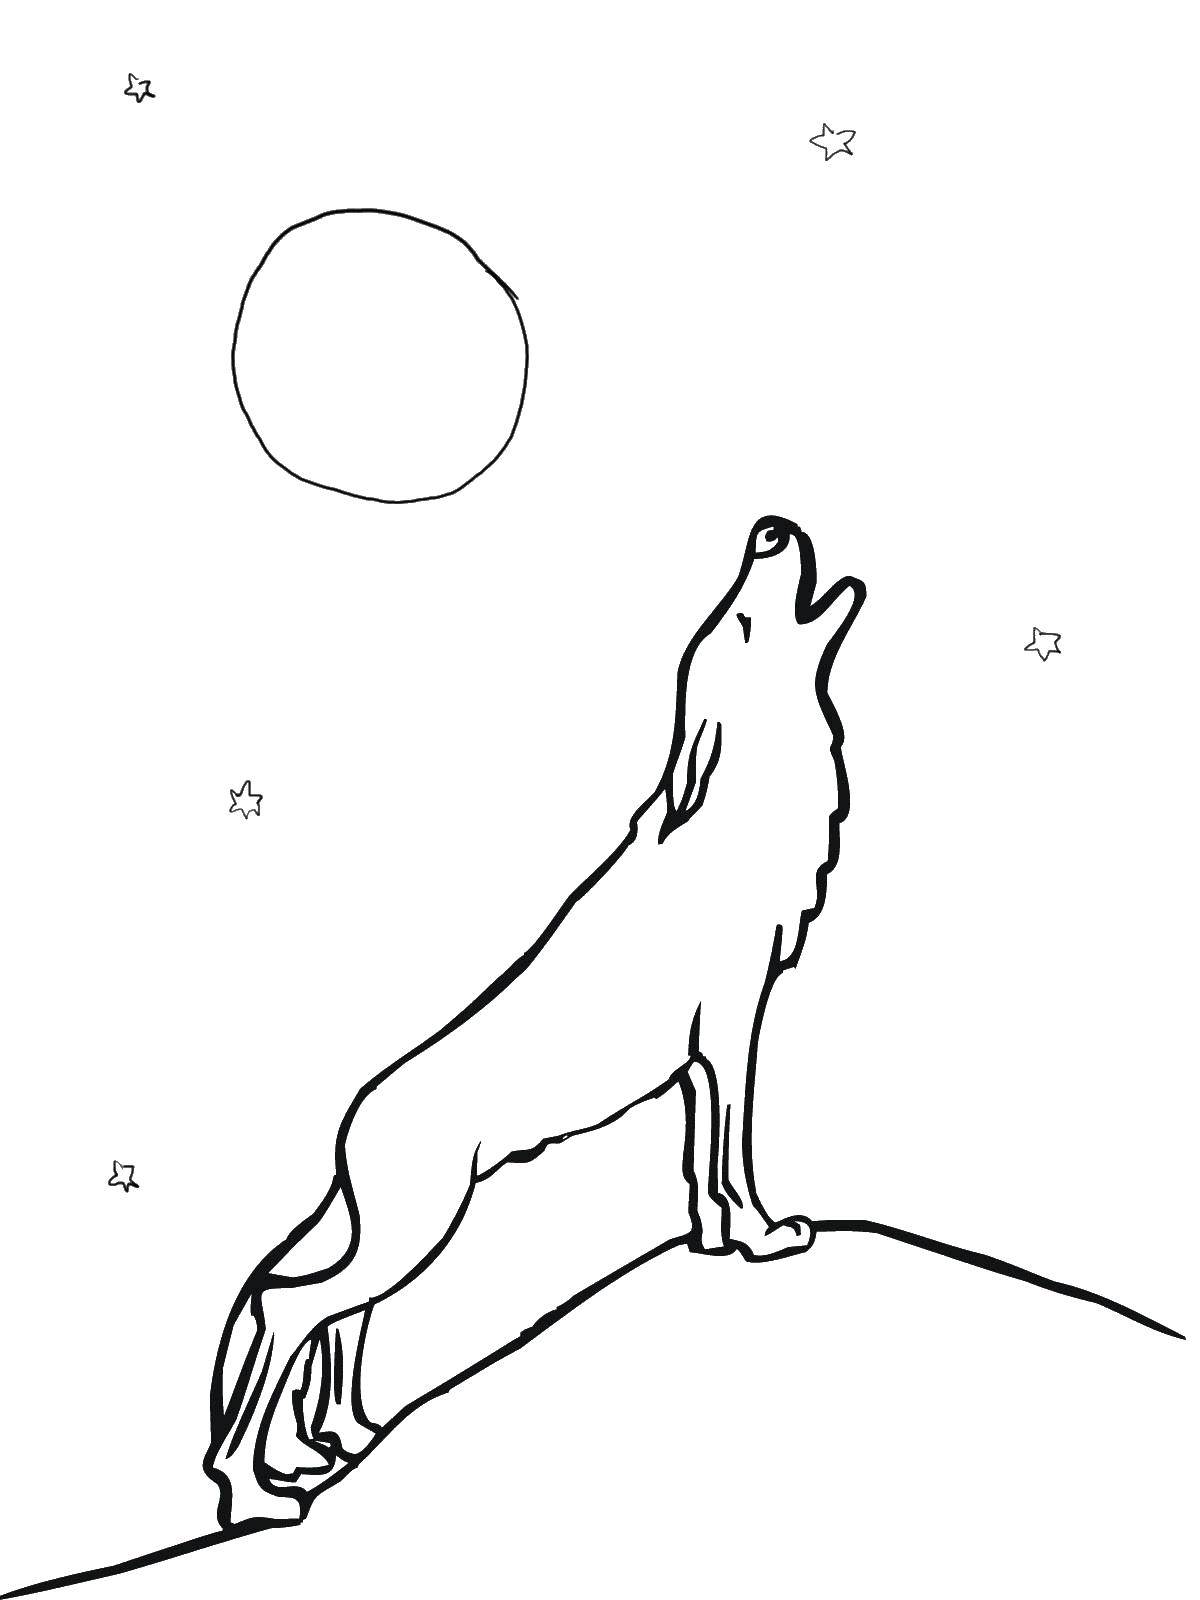 Coloring The wolf and the moon. Category coloring. Tags:  wolf , moon, stars.